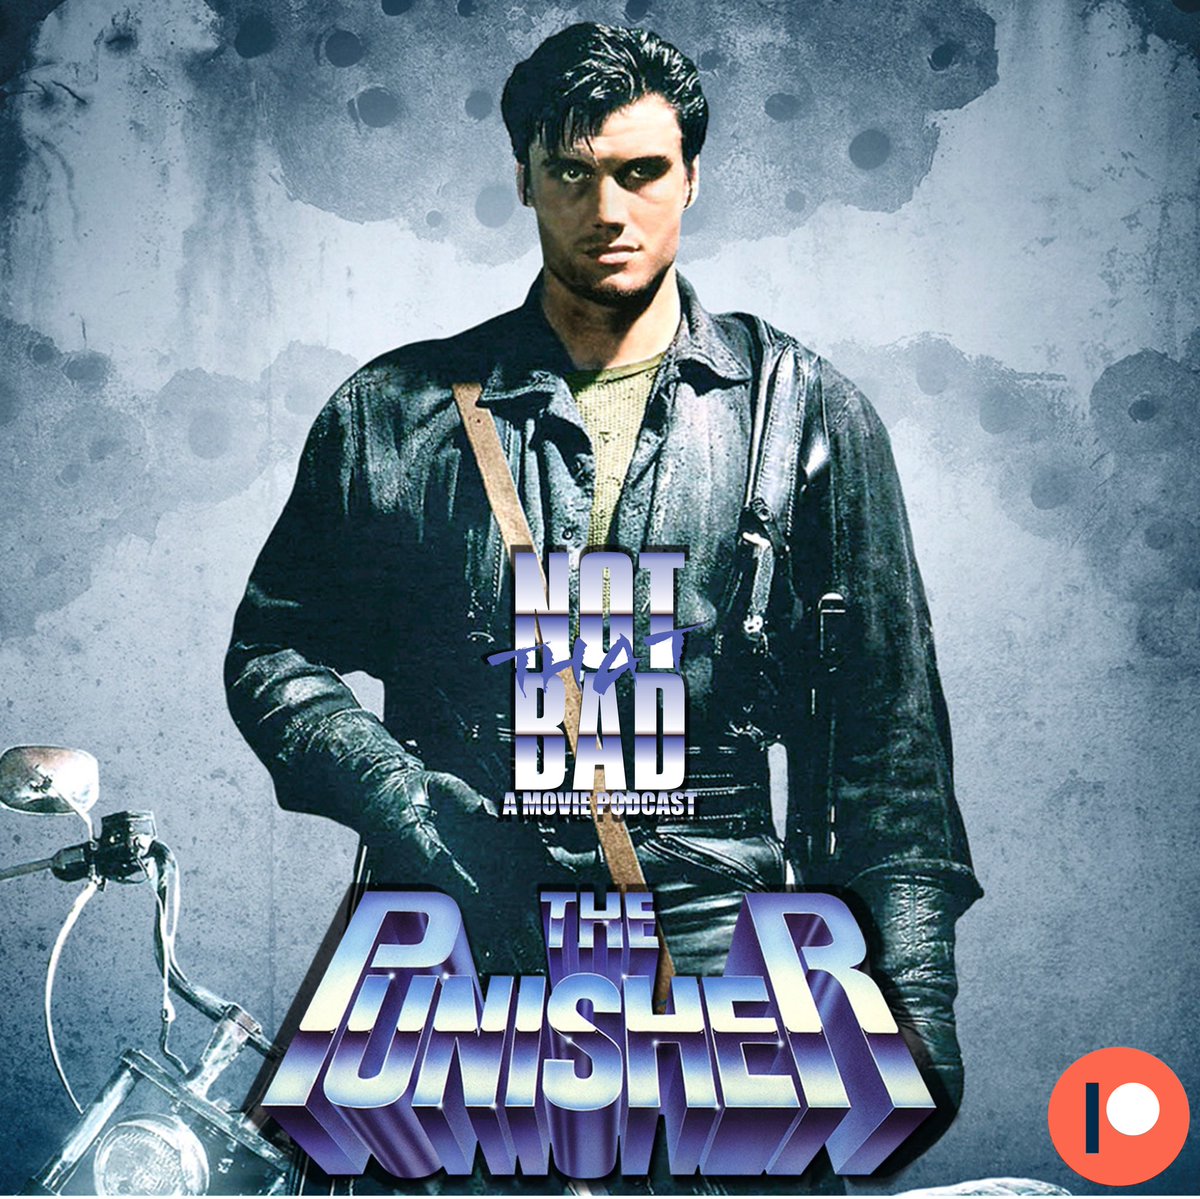 Straight from the Not That Bad Patreon Vault comes our discussion on the 1989 version of The Punisher! Now available for FREE on all platforms!

open.spotify.com/episode/0tBaX7…

podcasts.apple.com/us/podcast/not…

youtu.be/DH84sMSLhGM?si…

#Marvel #MCU #notthatbad #Punisher #ThePunisher #Daredevil